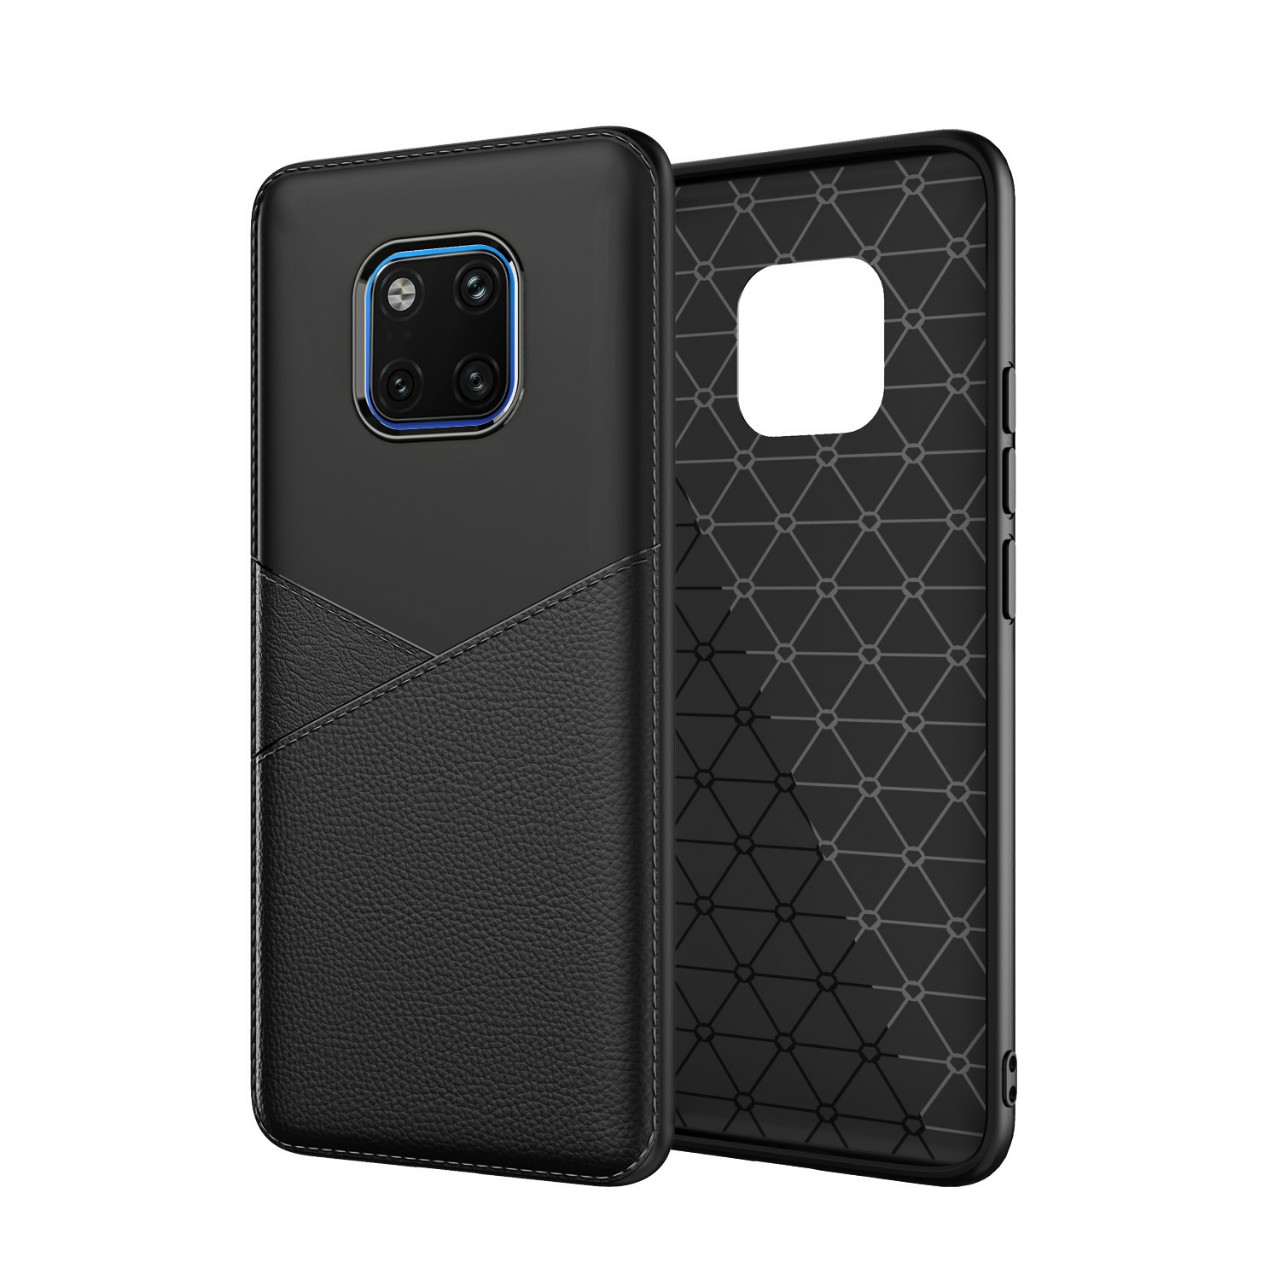 NORDIC LEATHER EFFECT BACK CASE FOR HUAWEI MATE 20 PRO - BROWN